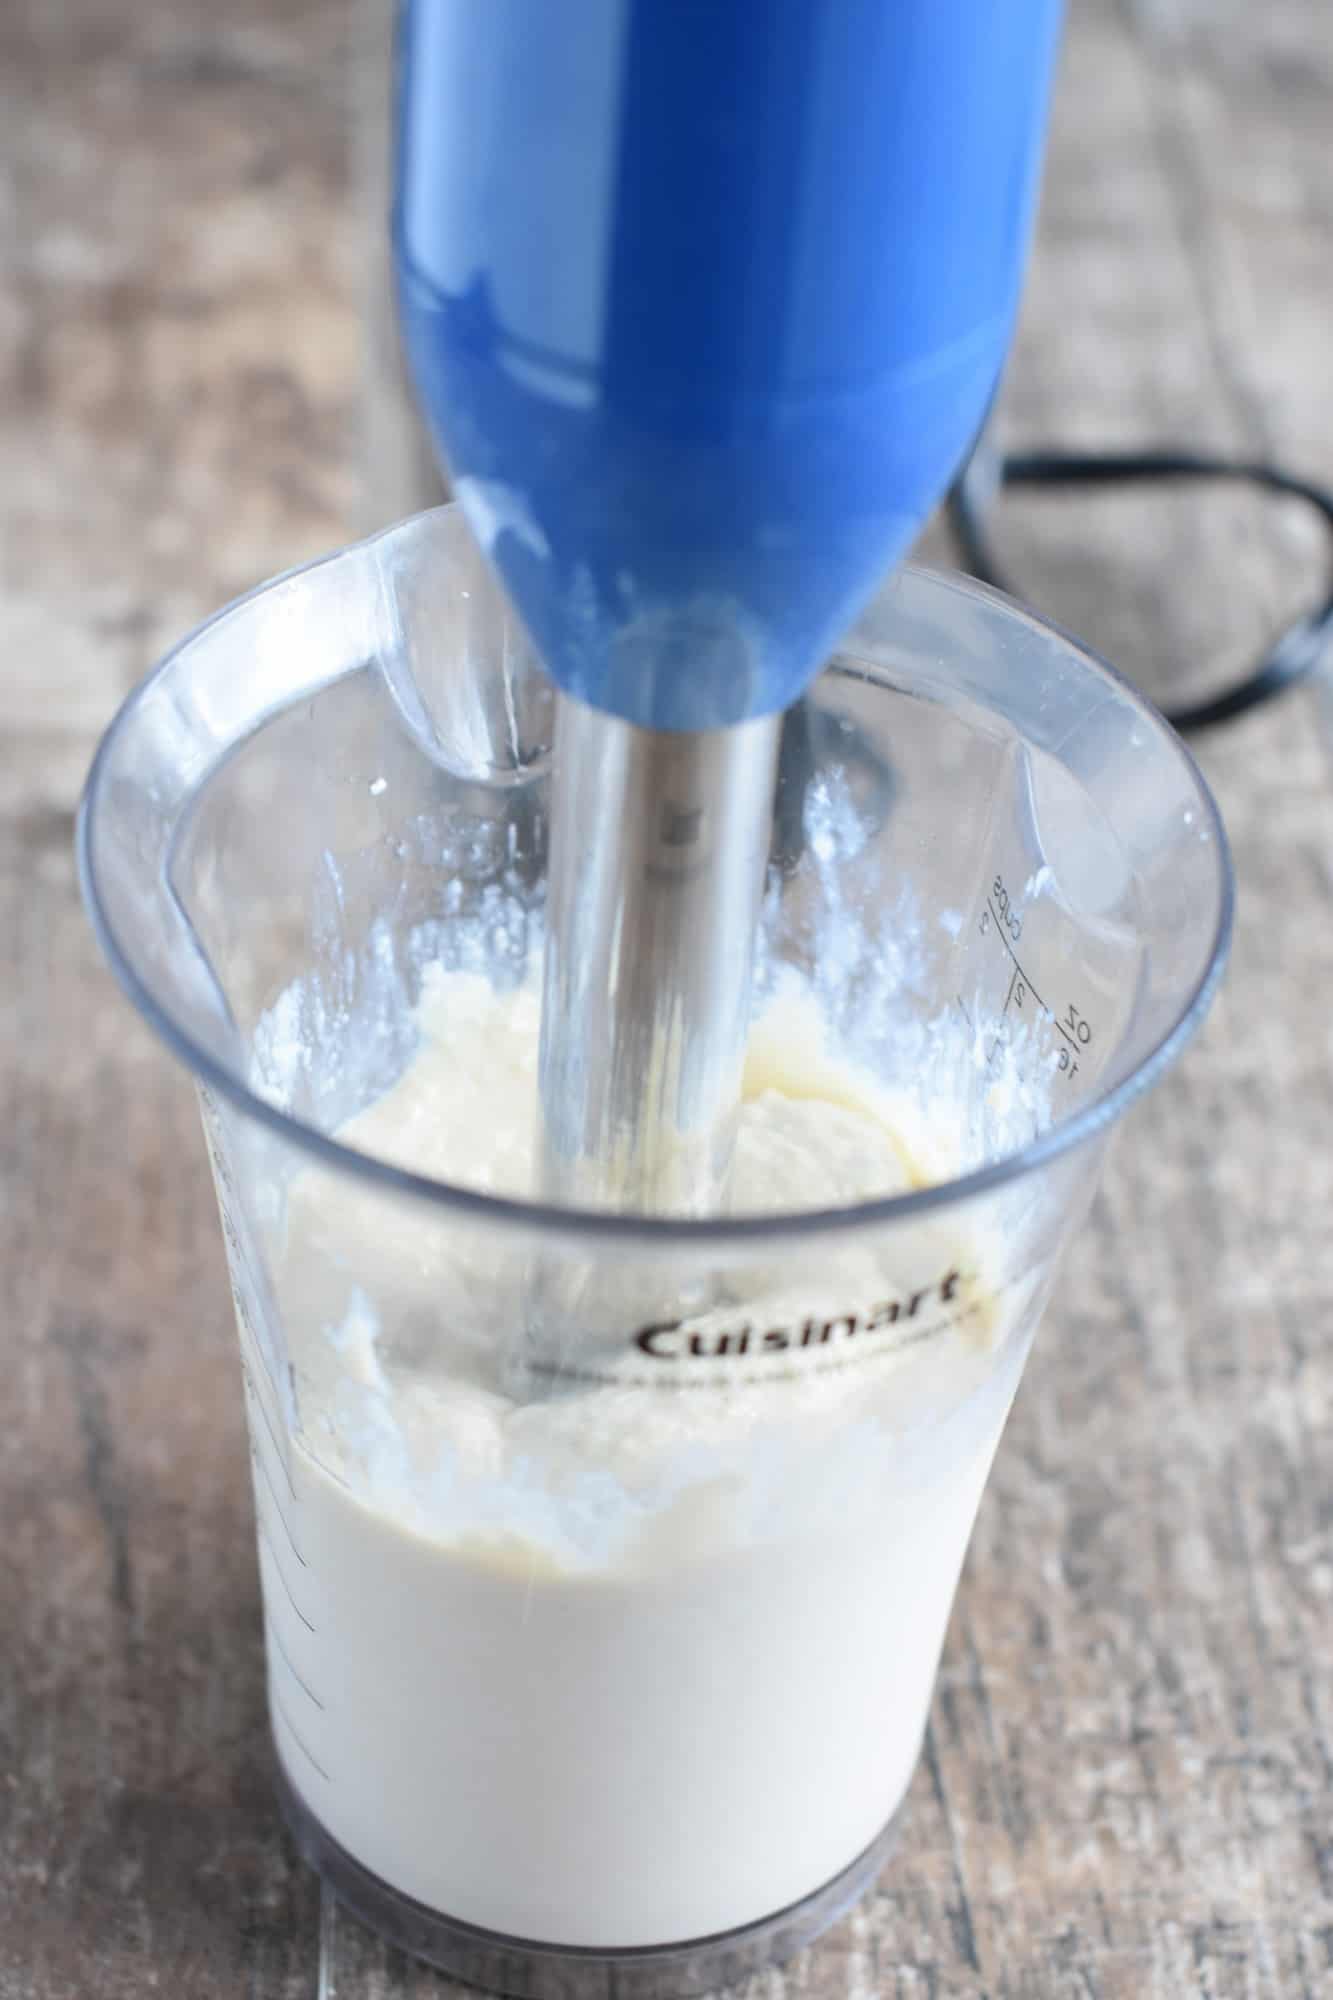 blending the tofu mixture with the immersion blender